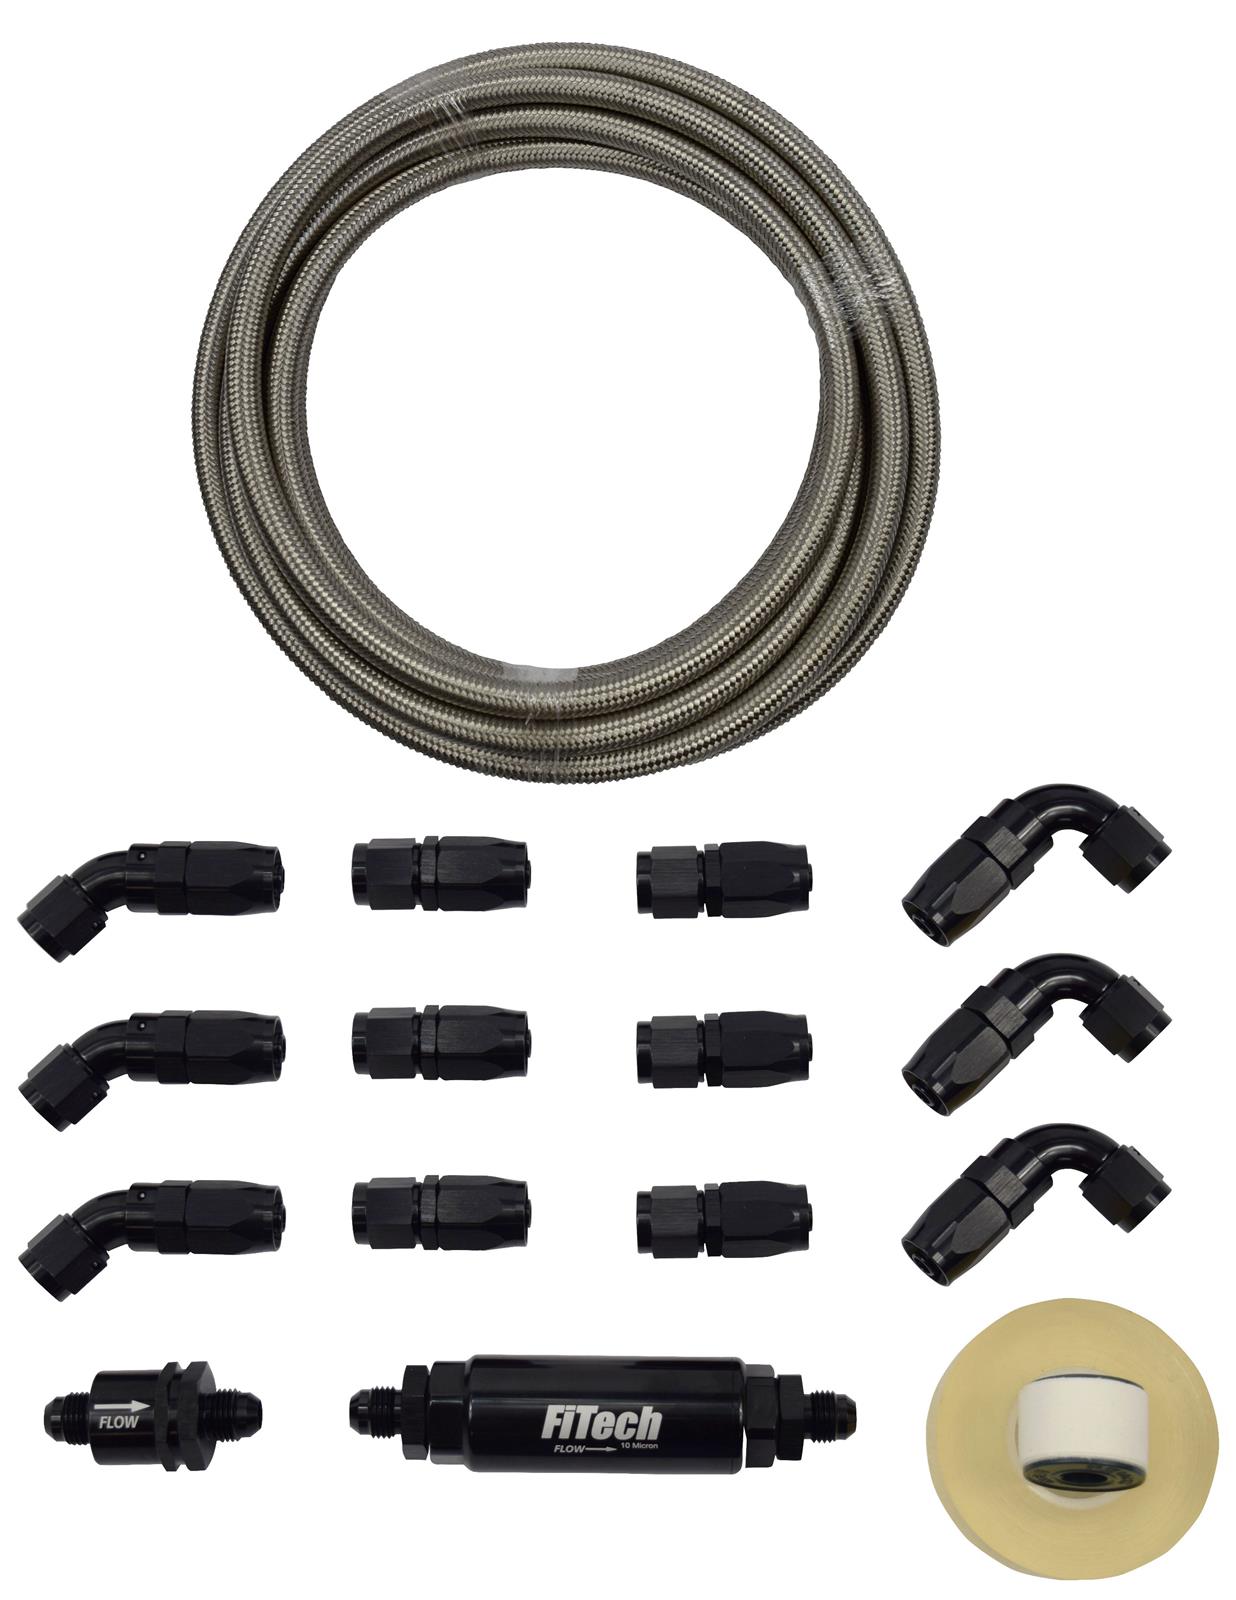 FiTech Fuel Injection 51001 FiTech Stainless Steel Fuel Line Kits